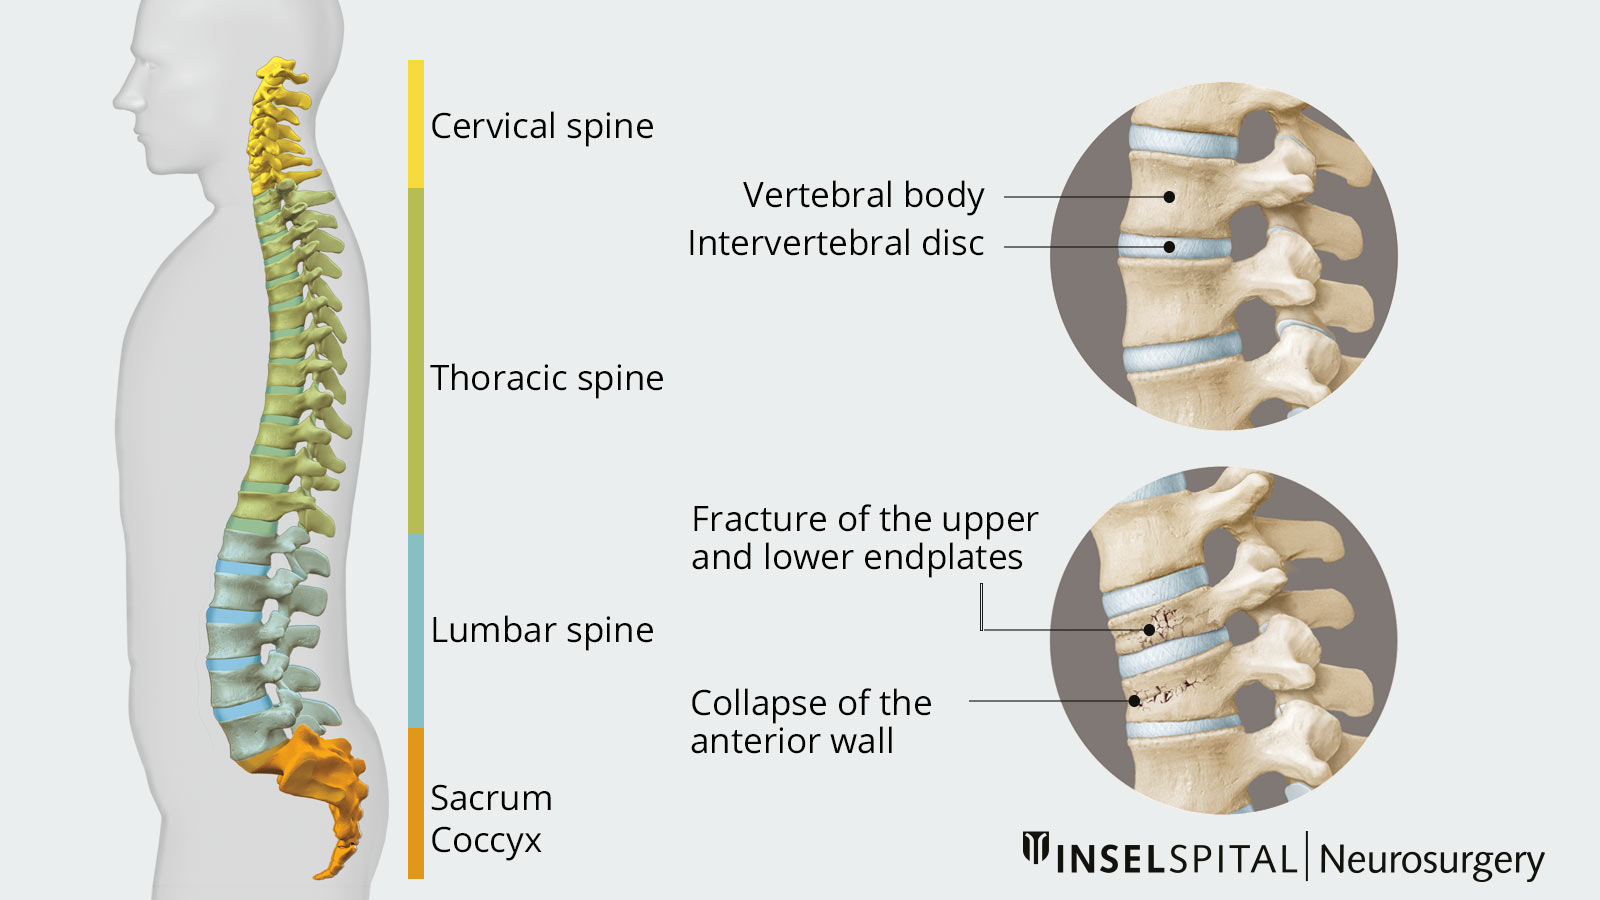 Drawing of the complete spine in side view. Different vertebrae are marked in different colors. In detail view you can see vertebral body and intervertebral disc as well as 2 types of vertebral fracture.